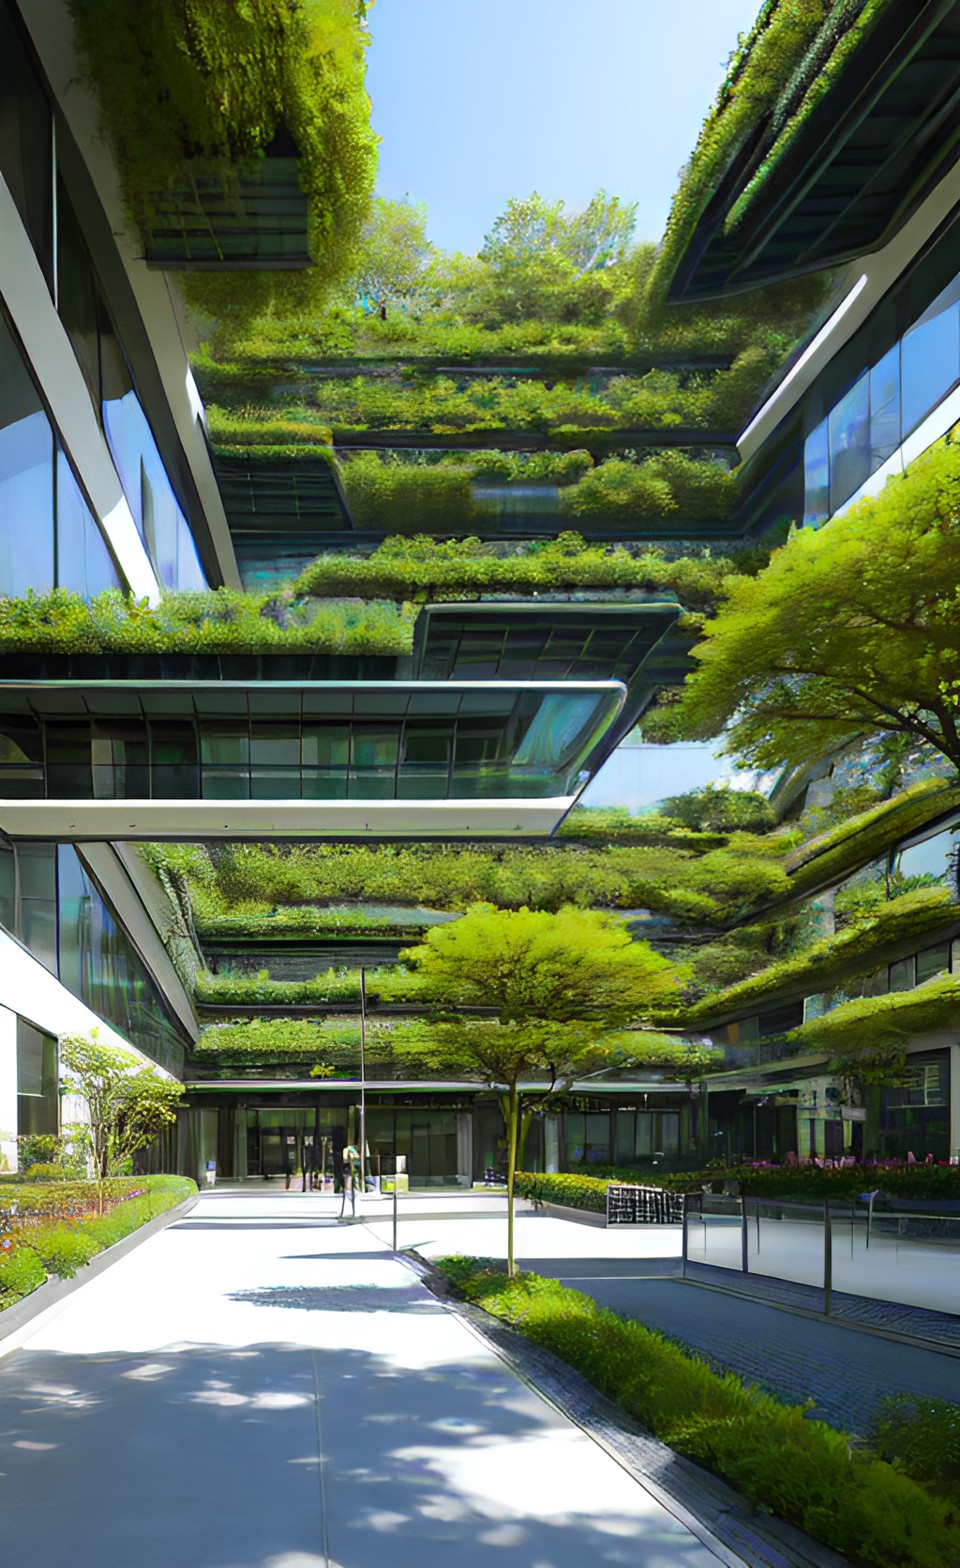 Biophilia in Architecture: Nurturing the Human-Nature Connection